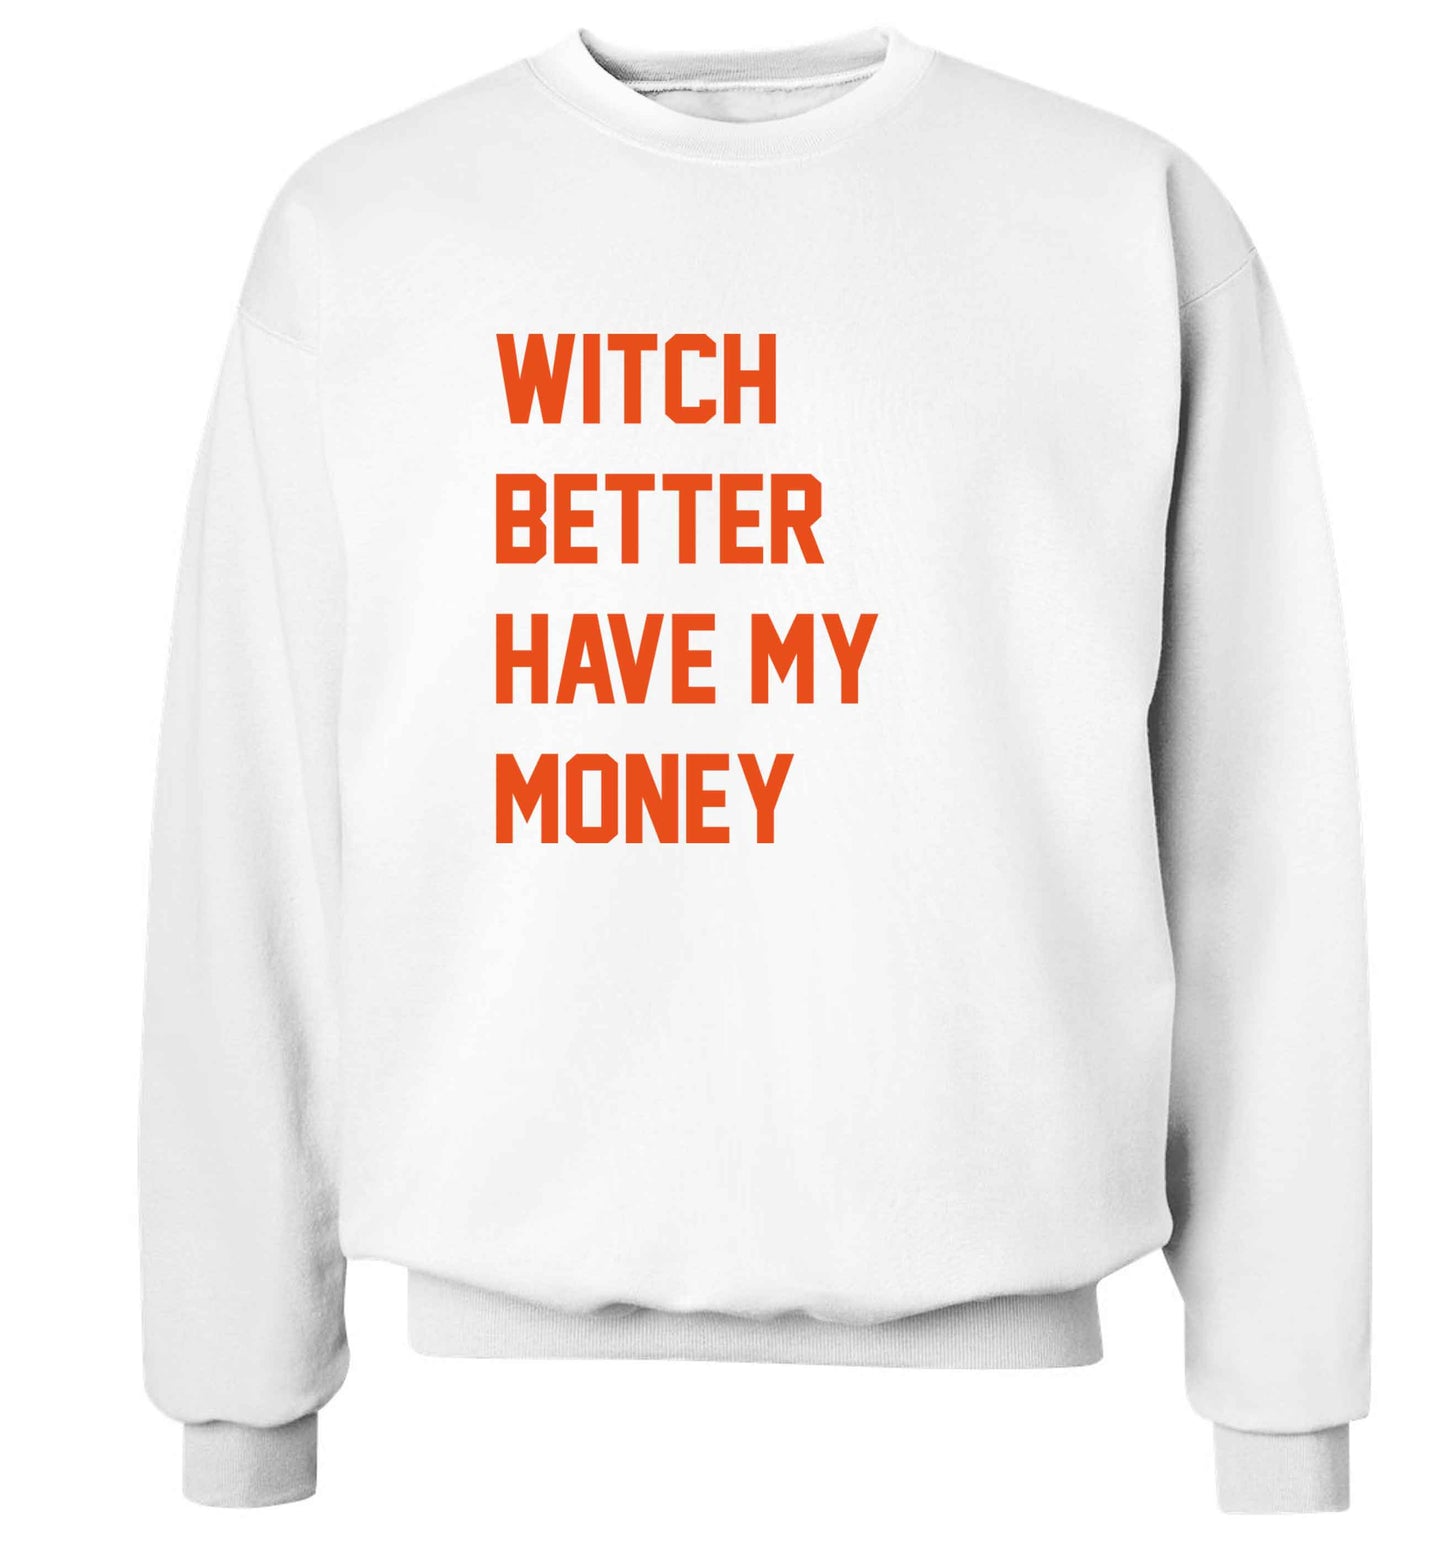 Witch better have my money adult's unisex white sweater 2XL